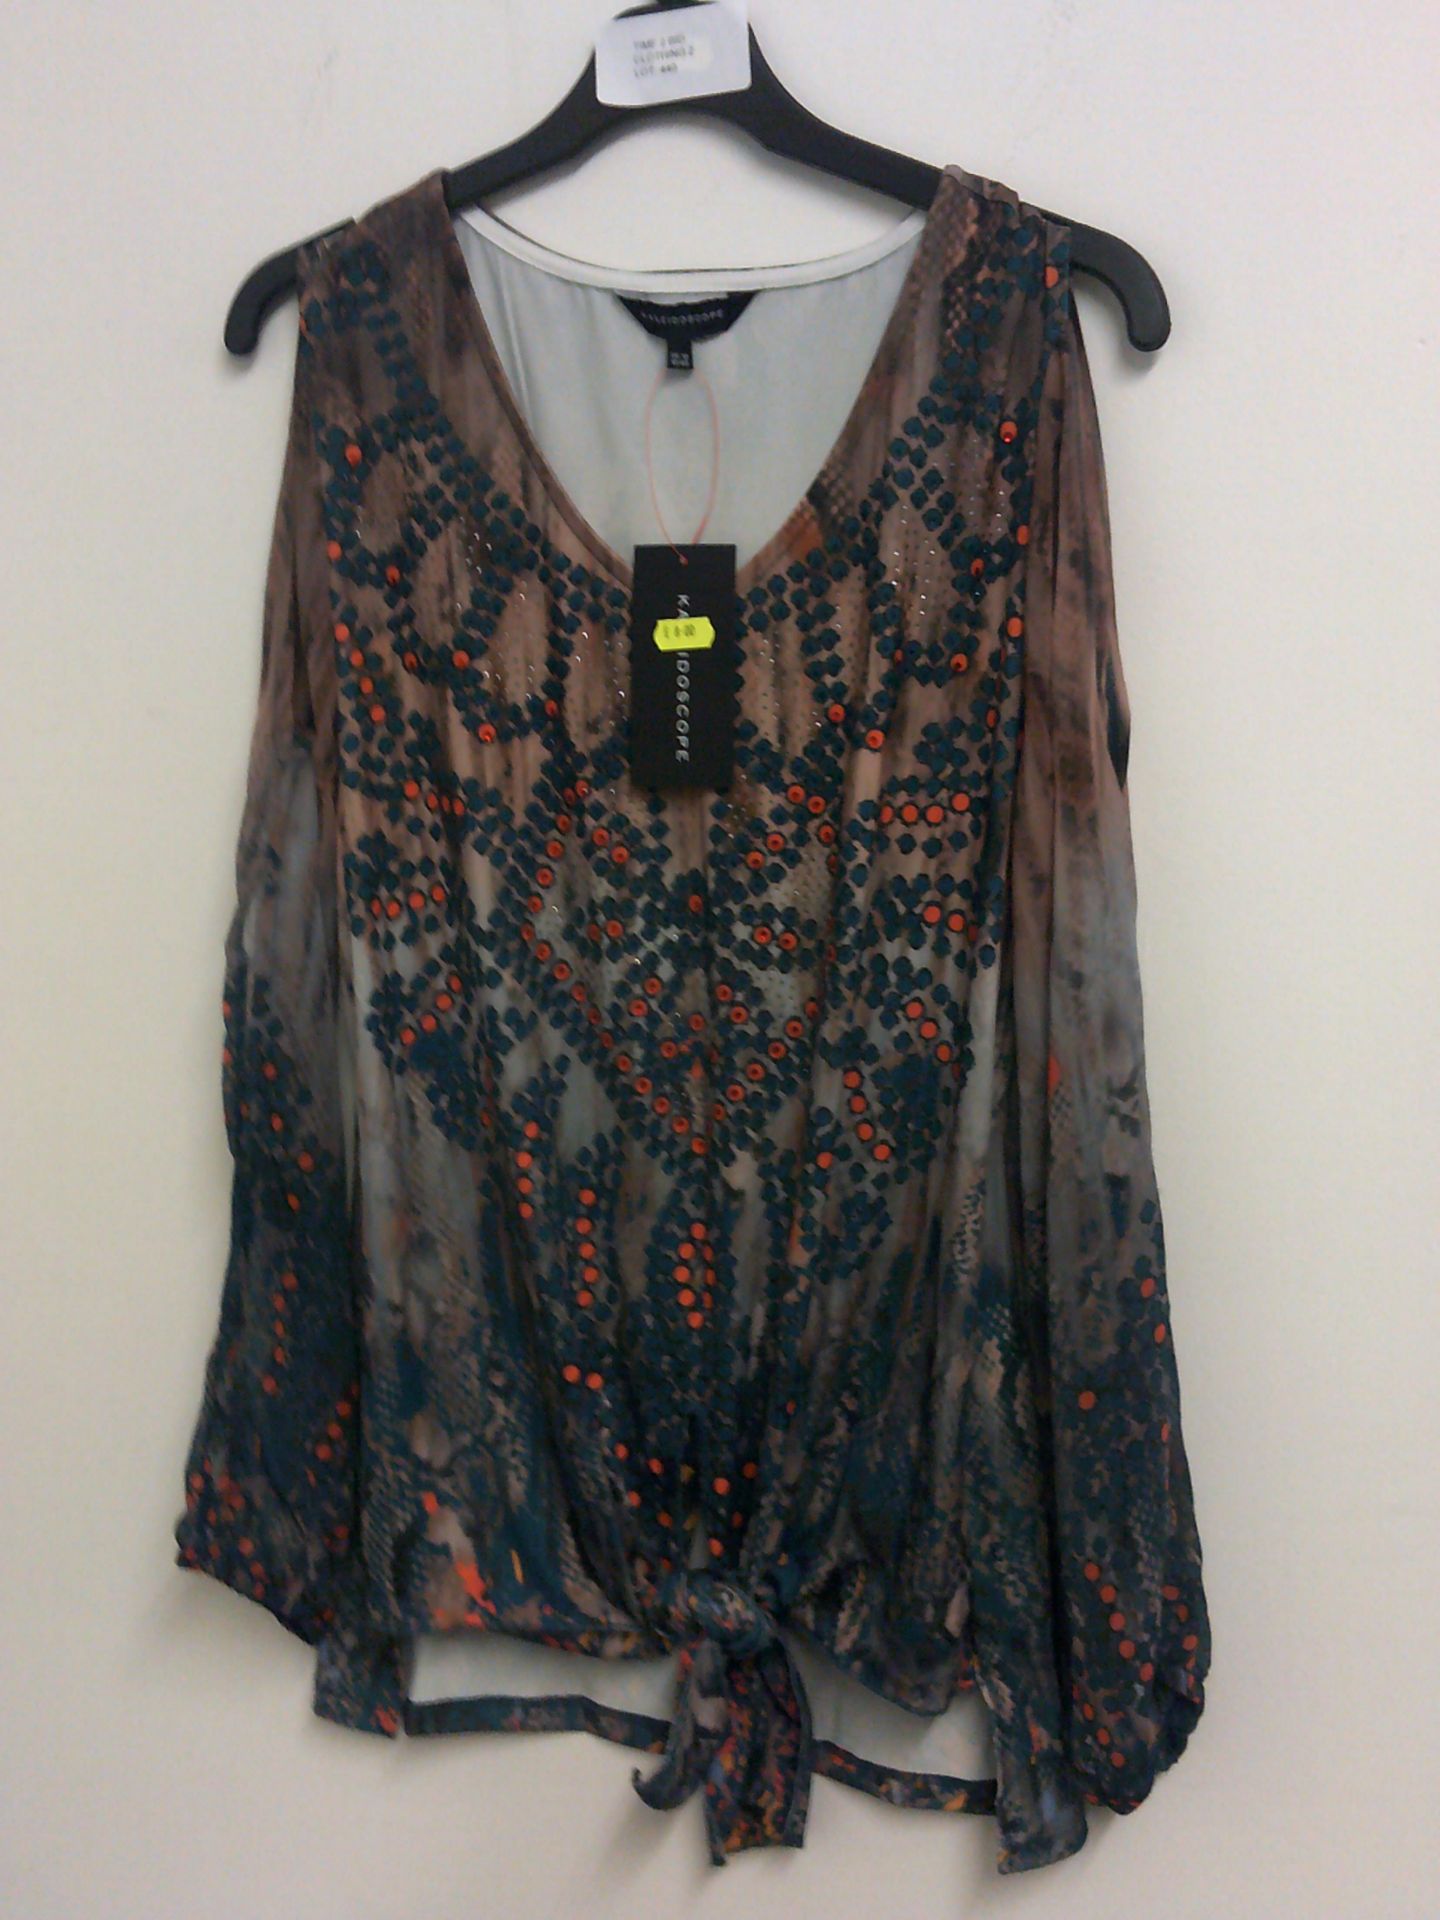 KALEIDOSCOPE PATTERENED TOP WITH SPARKLE TIE FRONT SIZE 12